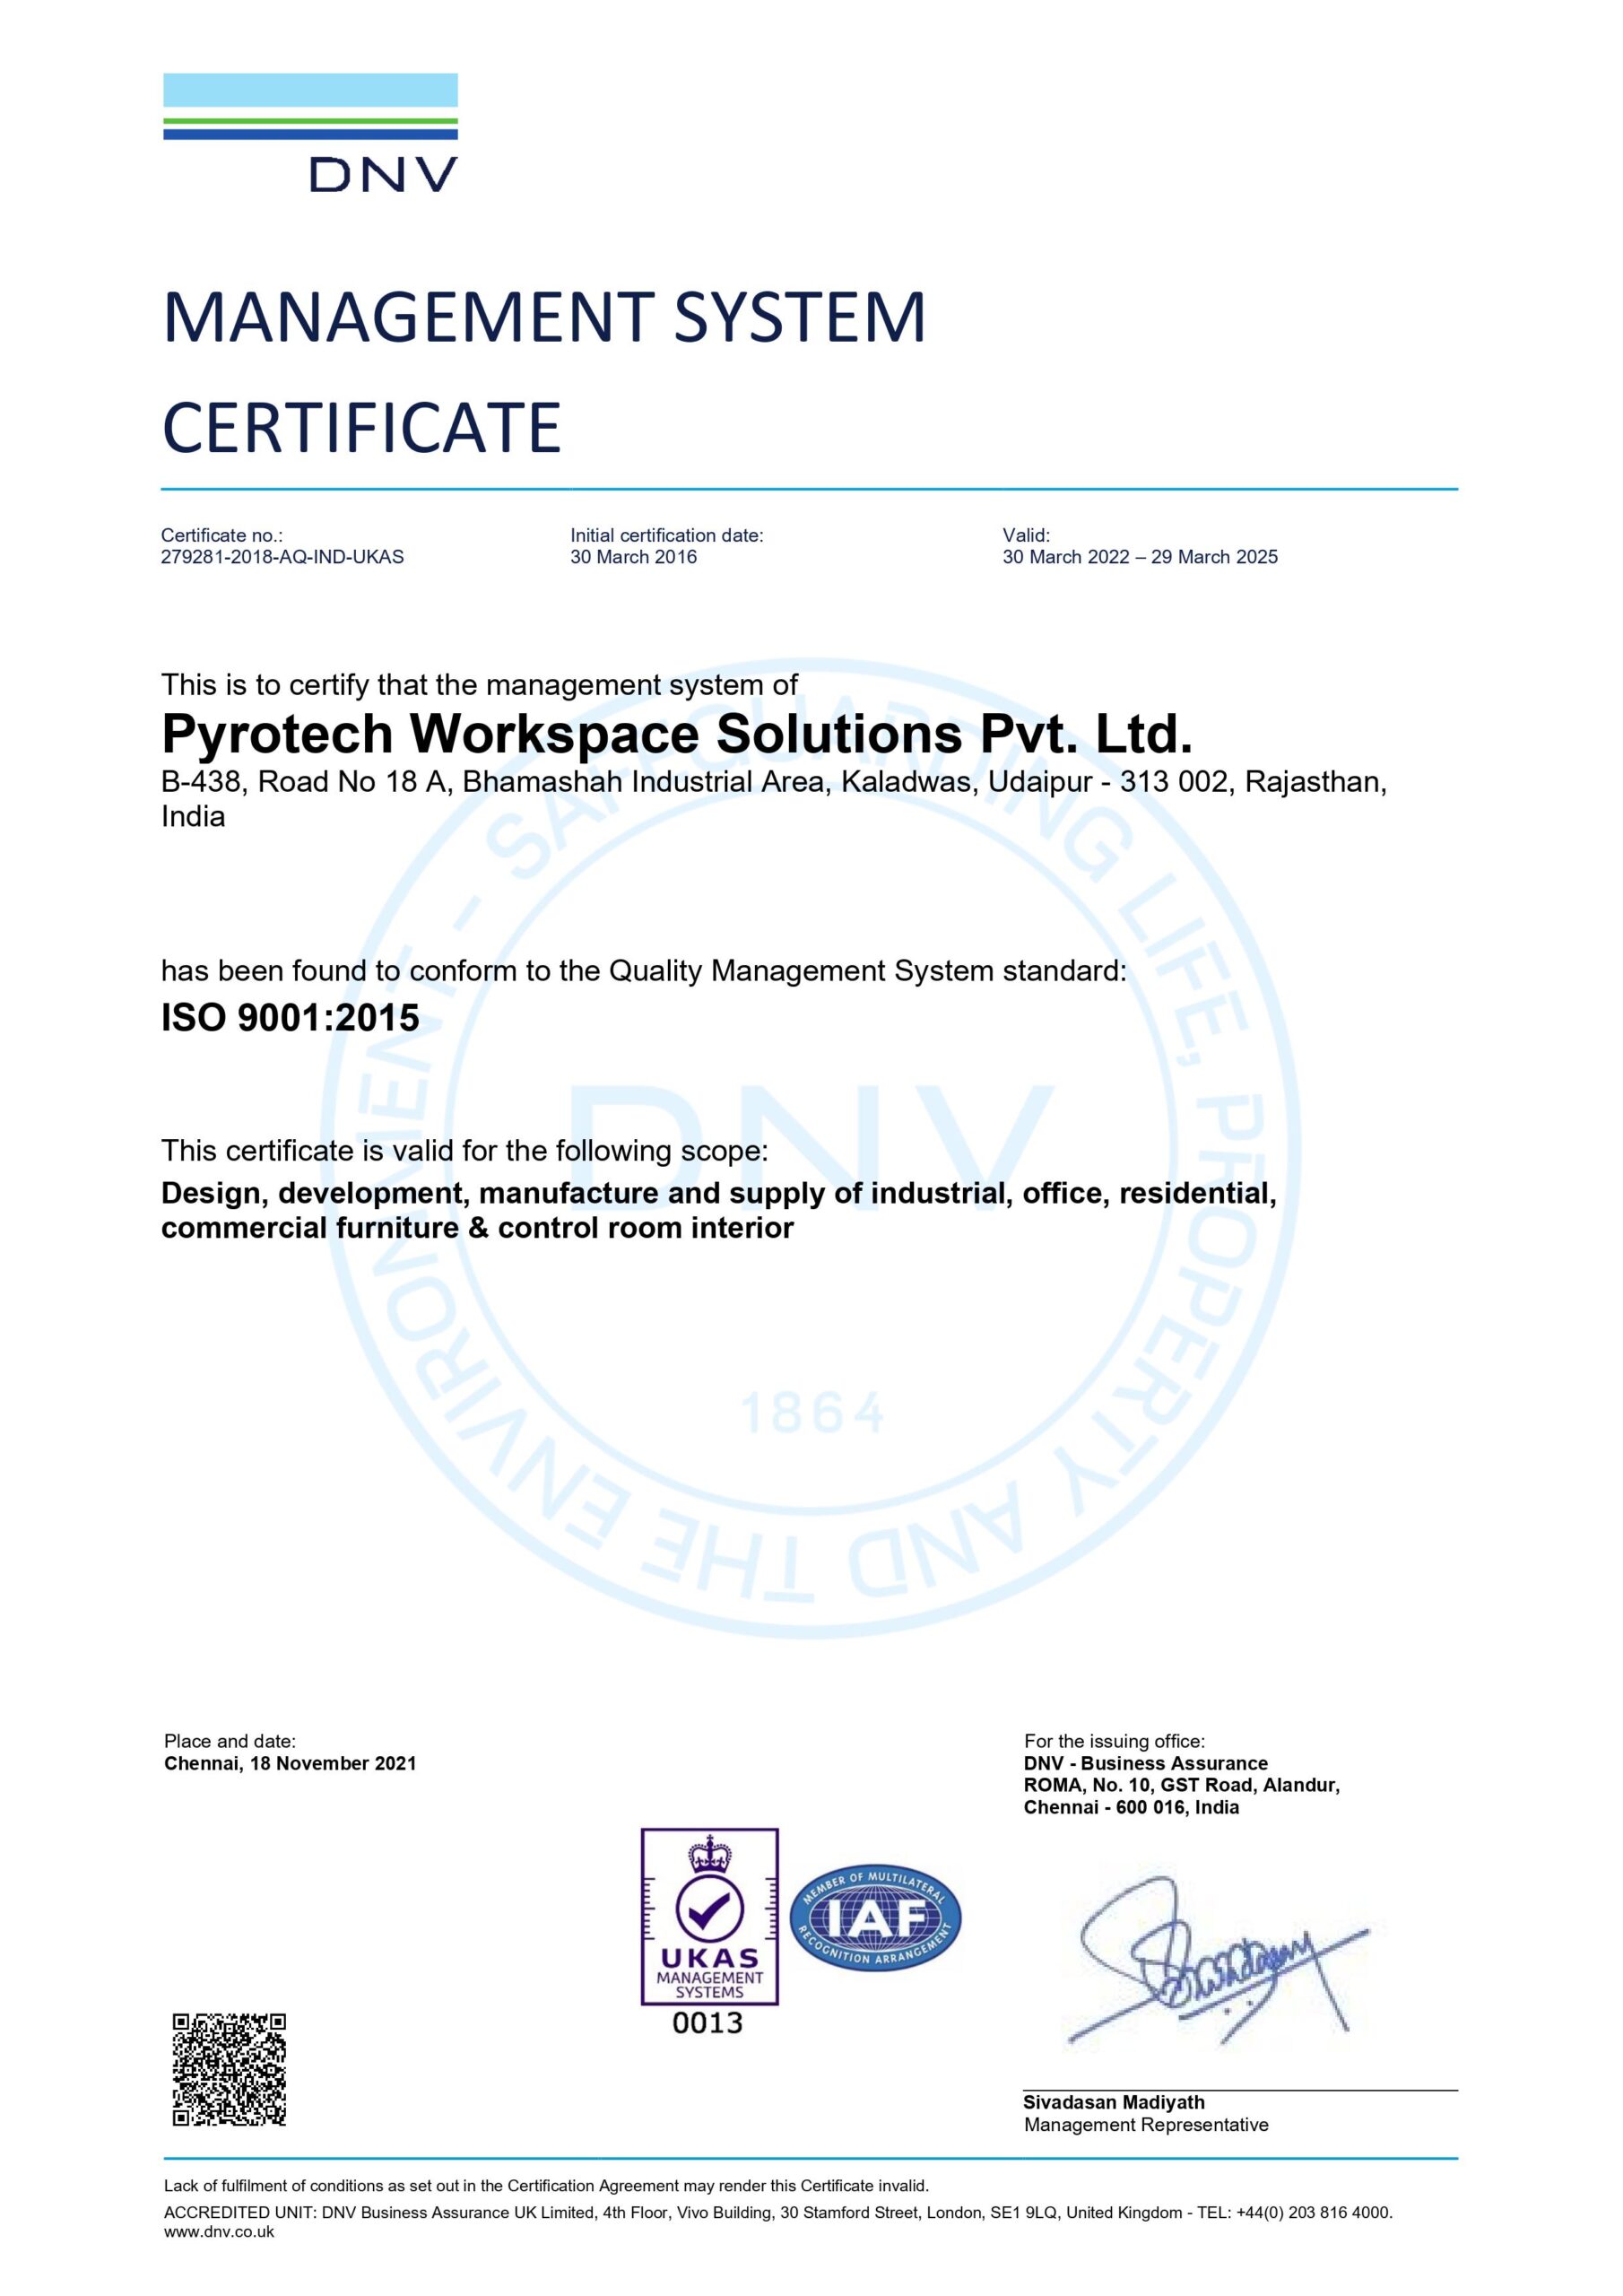 Management system certificate PWS